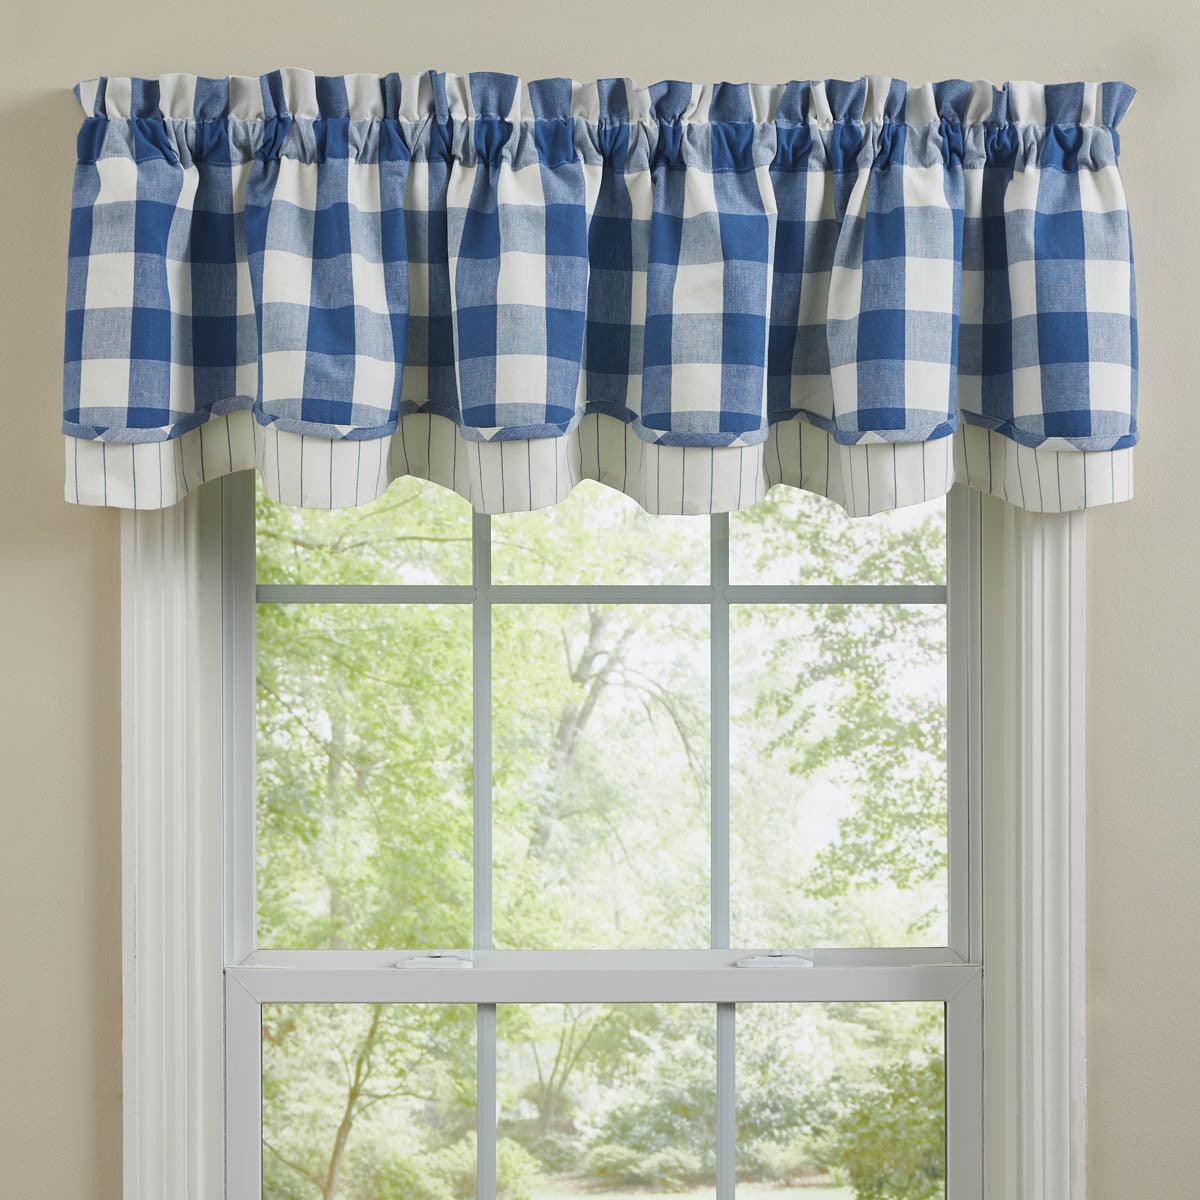 Wicklow Check Valance - Lined Layered China Blue Park Designs - The Fox Decor